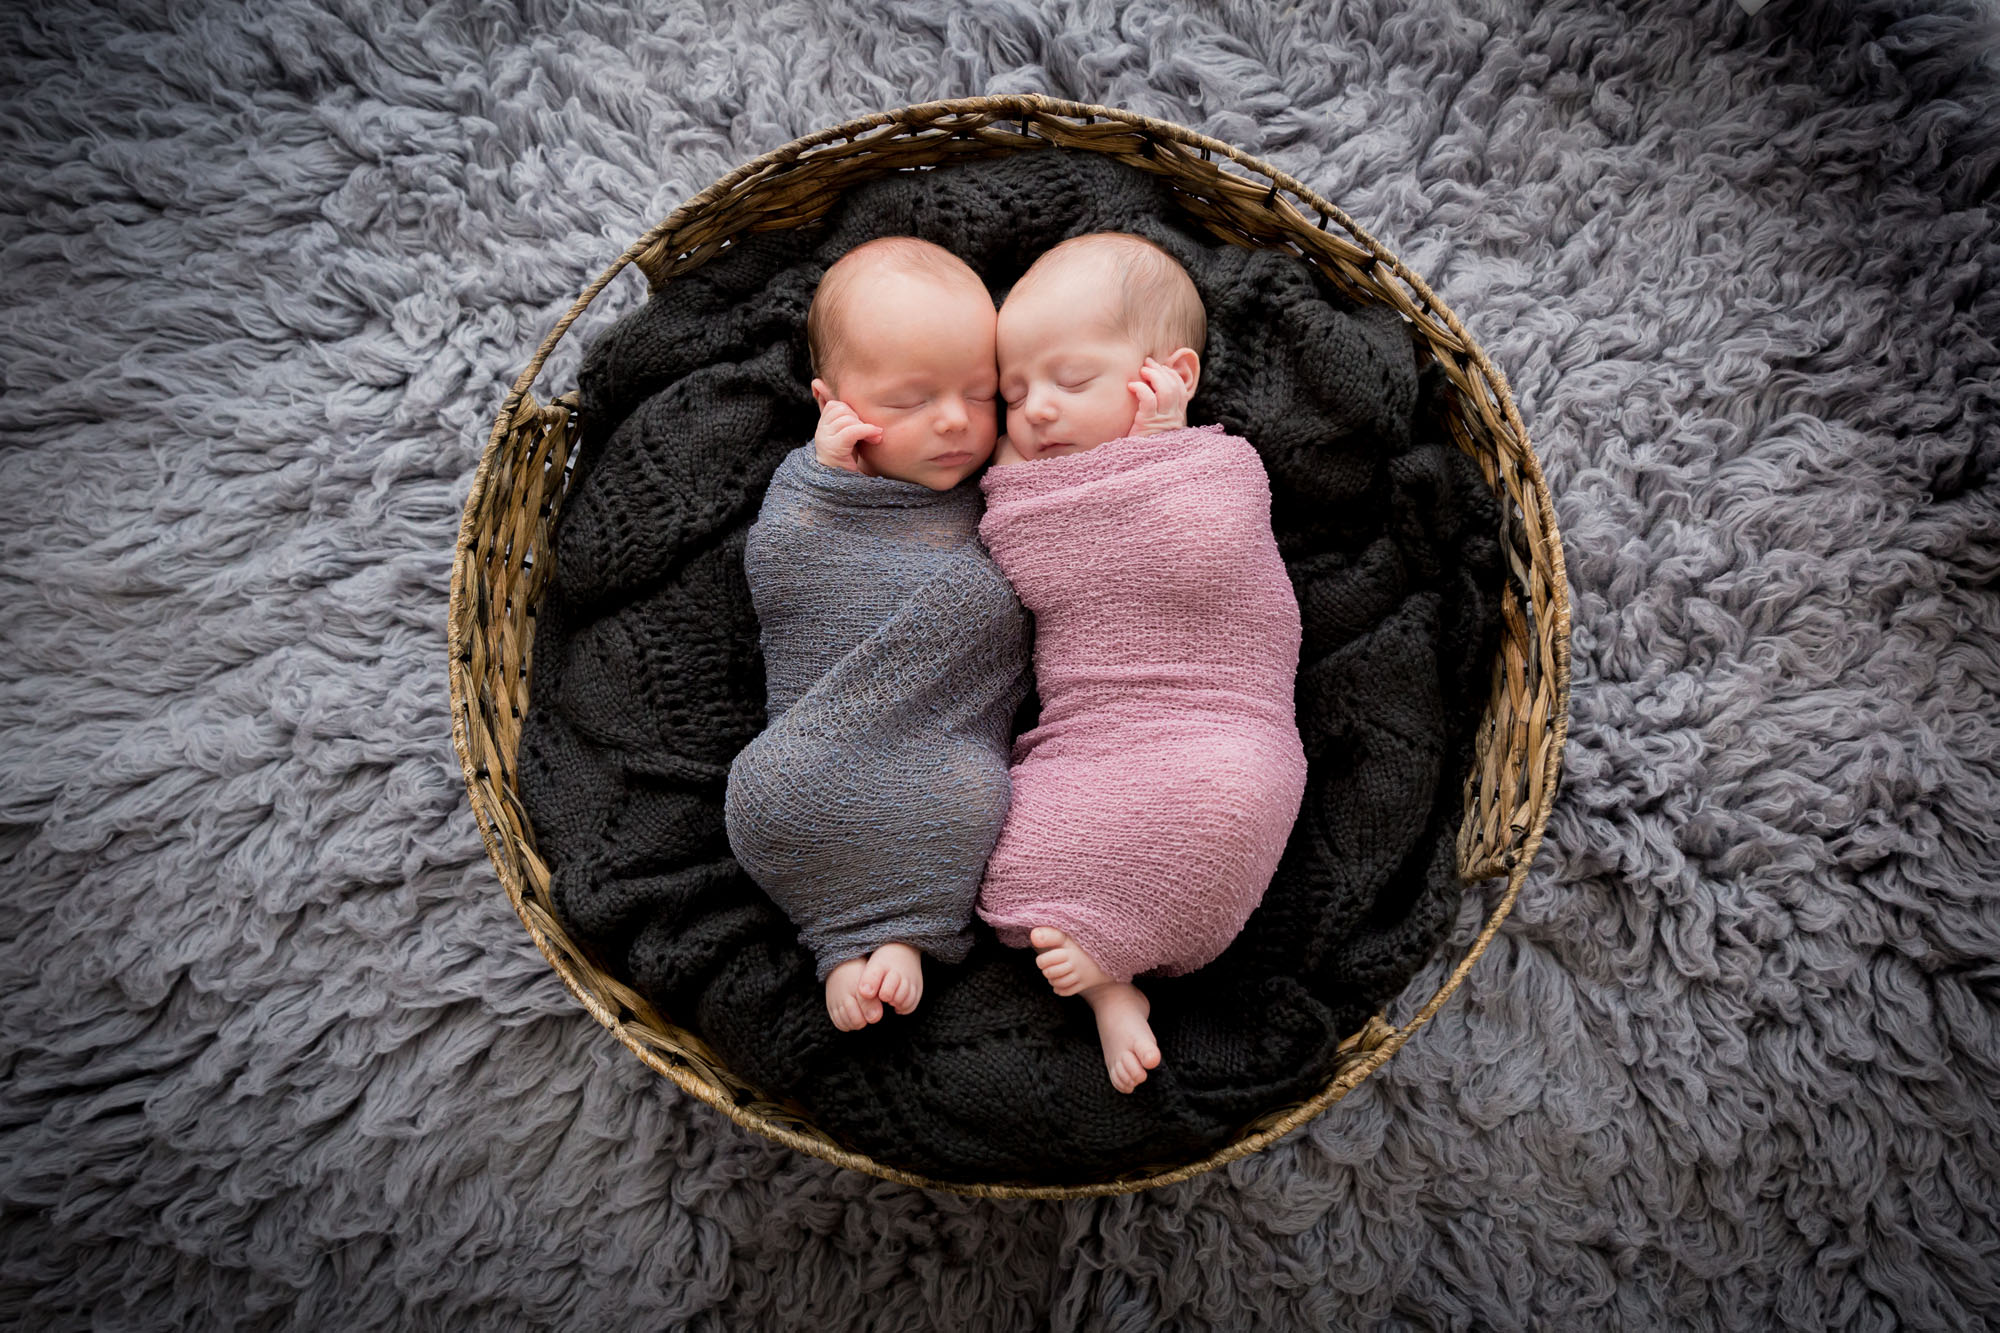 Posed Newborn Twins asleep in a basket together